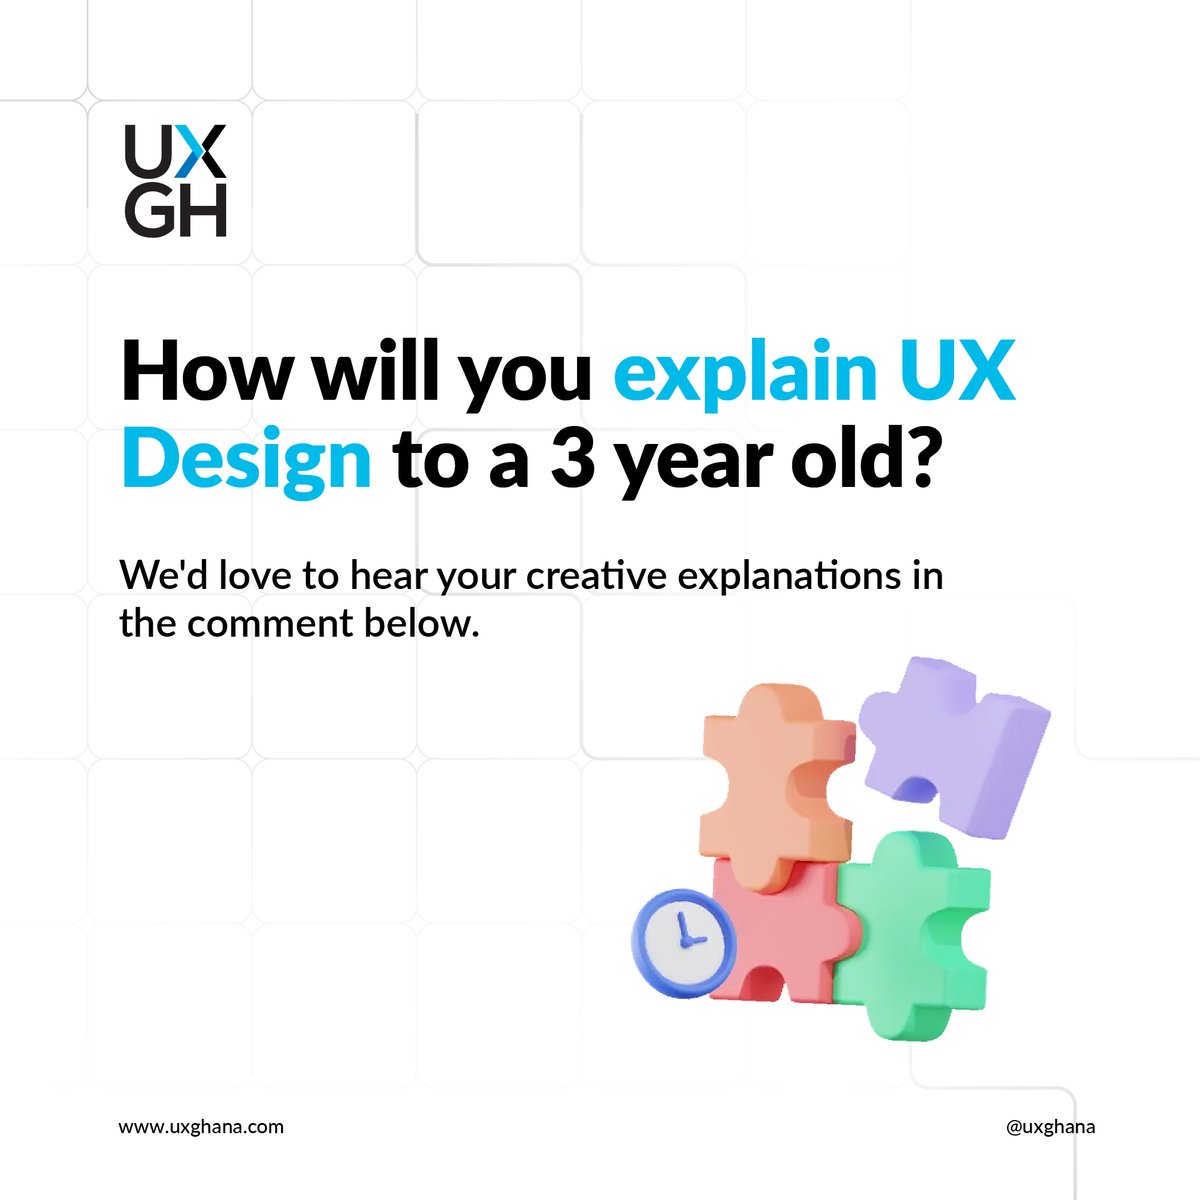 How will you explain UX Design to a 3 years old. #CreativeChallenge #UXDesign # #UXGhana